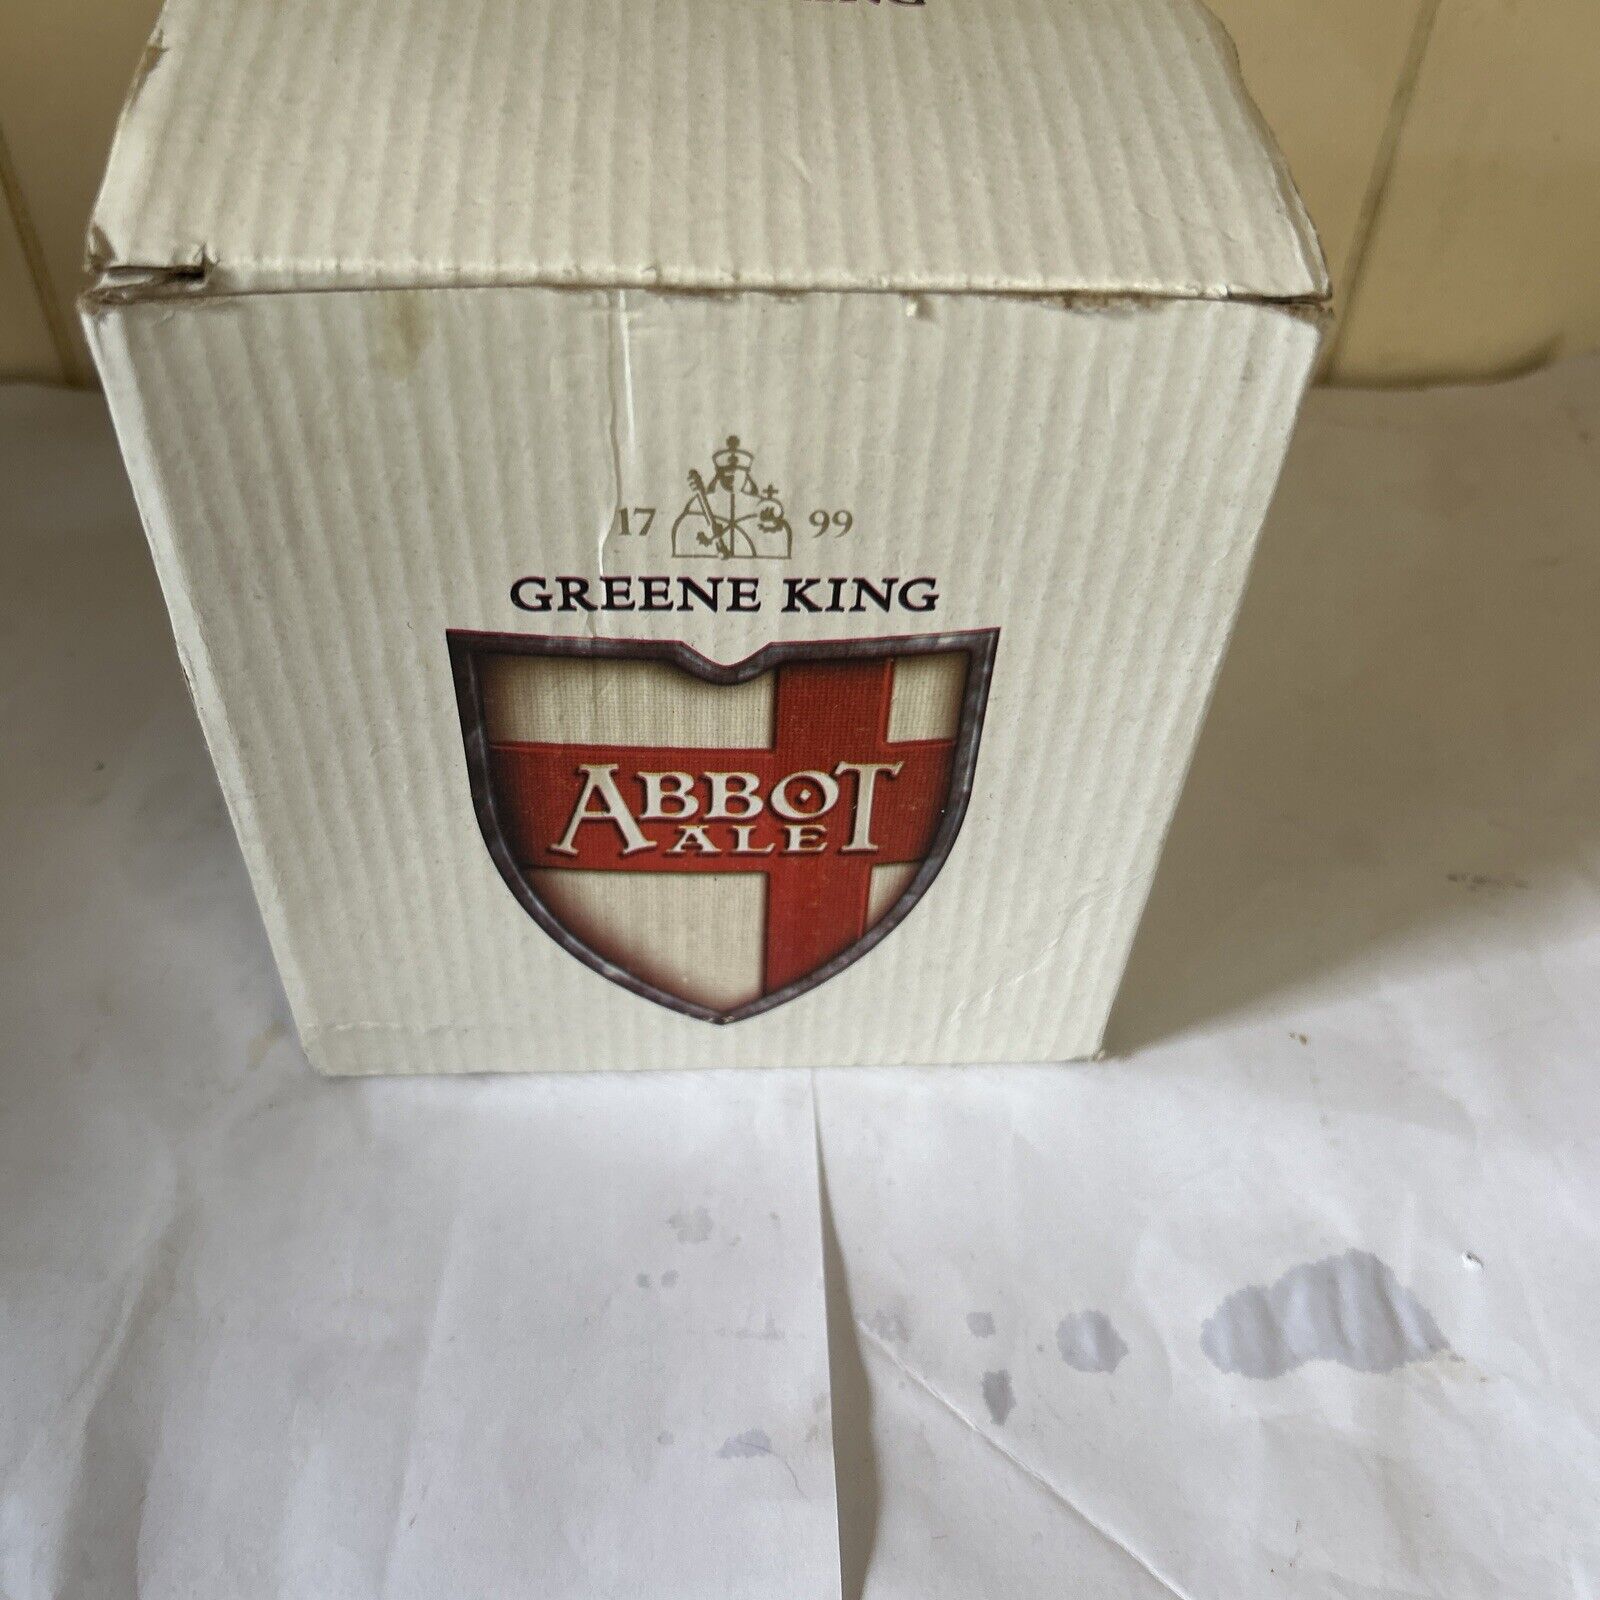 VINTAGE RARE BRAND NEW & BOXED GREEN KING ABBOT ALE BEER TANKARD